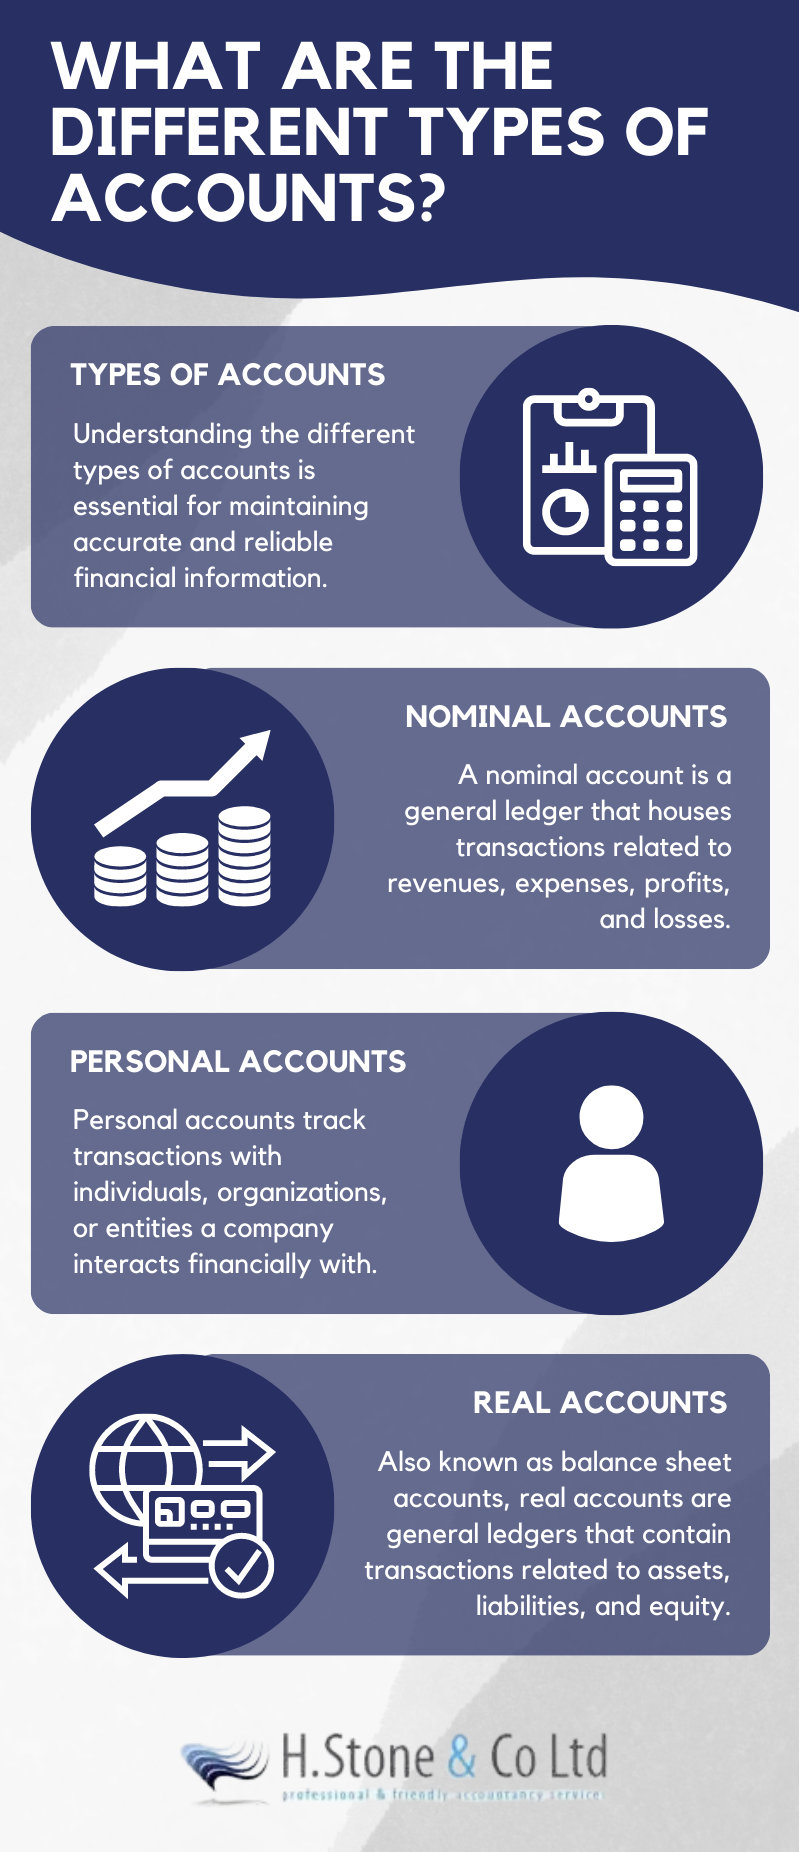 What Are The Different Types Of Accounts?